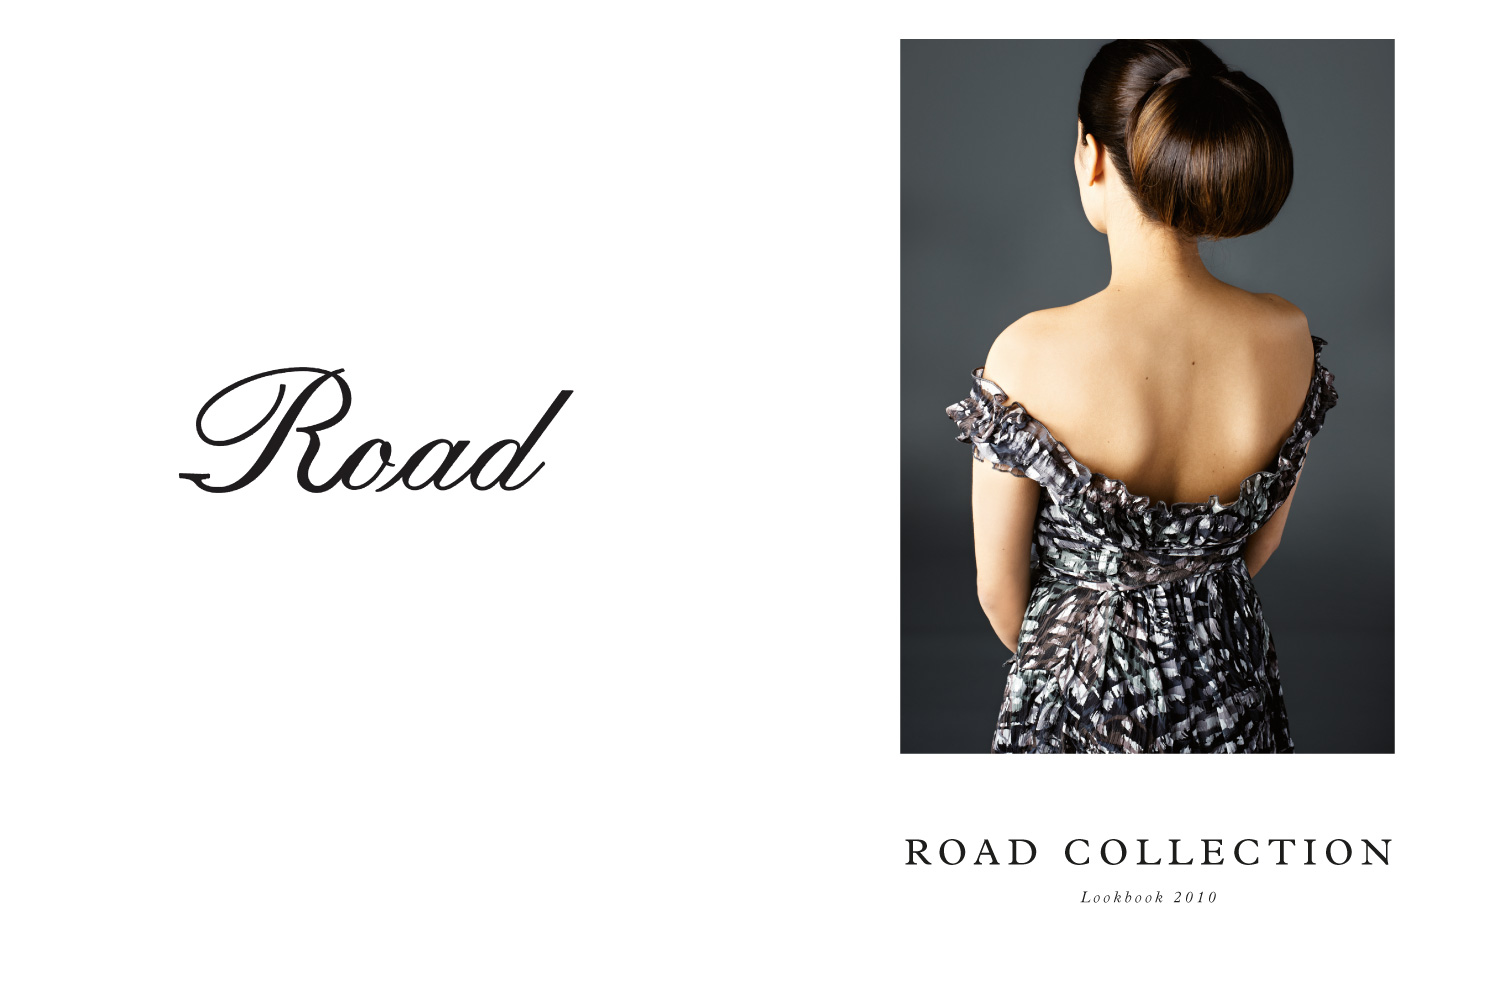 Road Collection Lookbook 2010